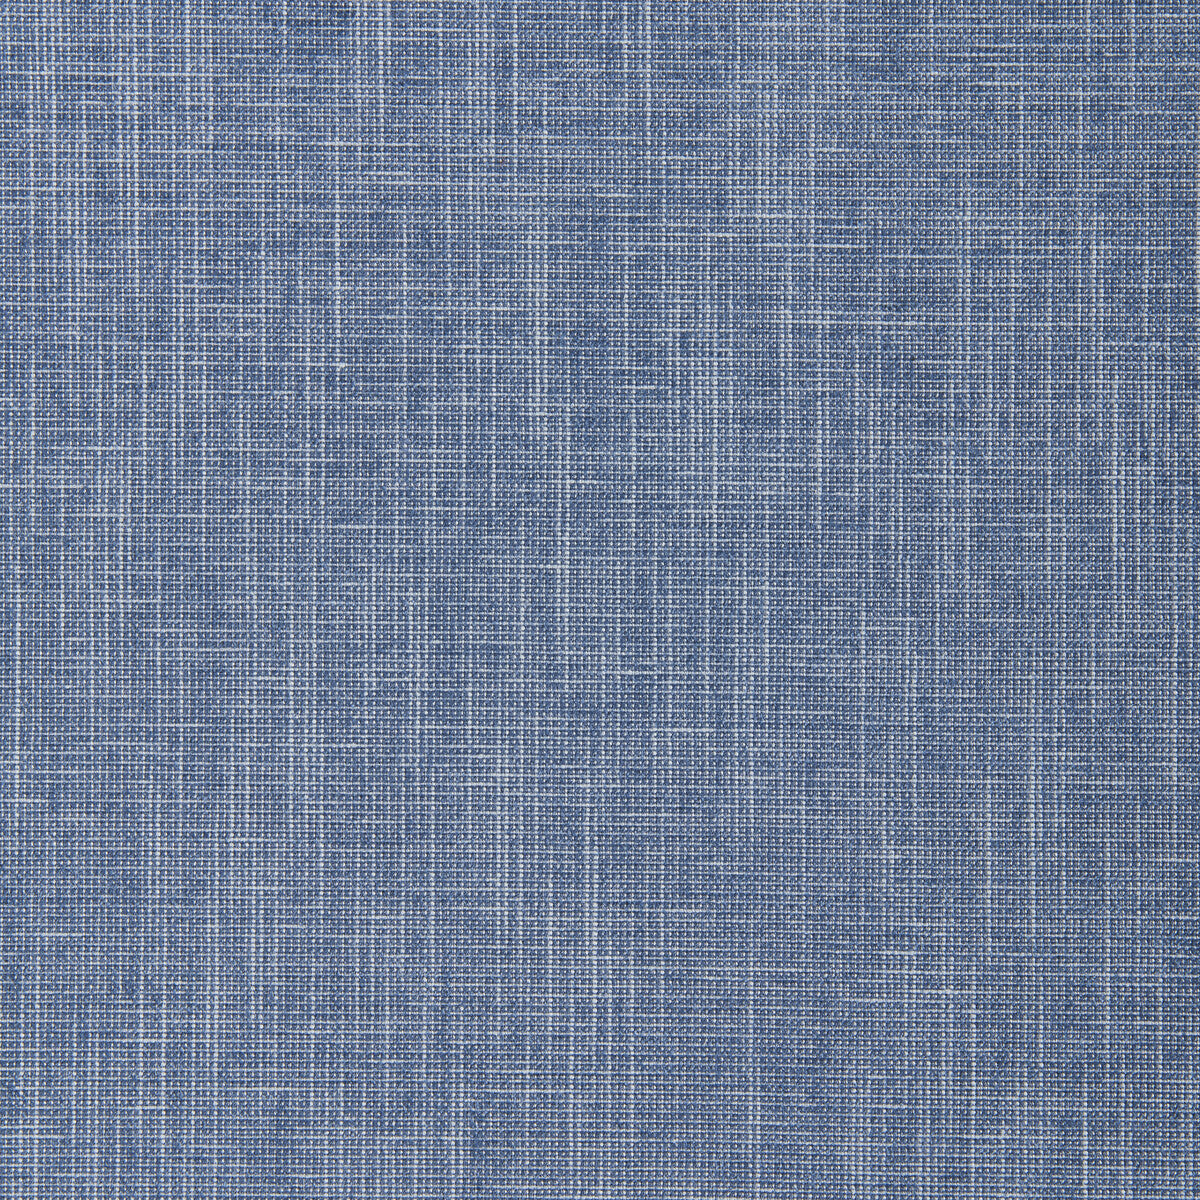 Kravet Smart fabric in 37078-515 color - pattern 37078.515.0 - by Kravet Smart in the Trio Textures collection